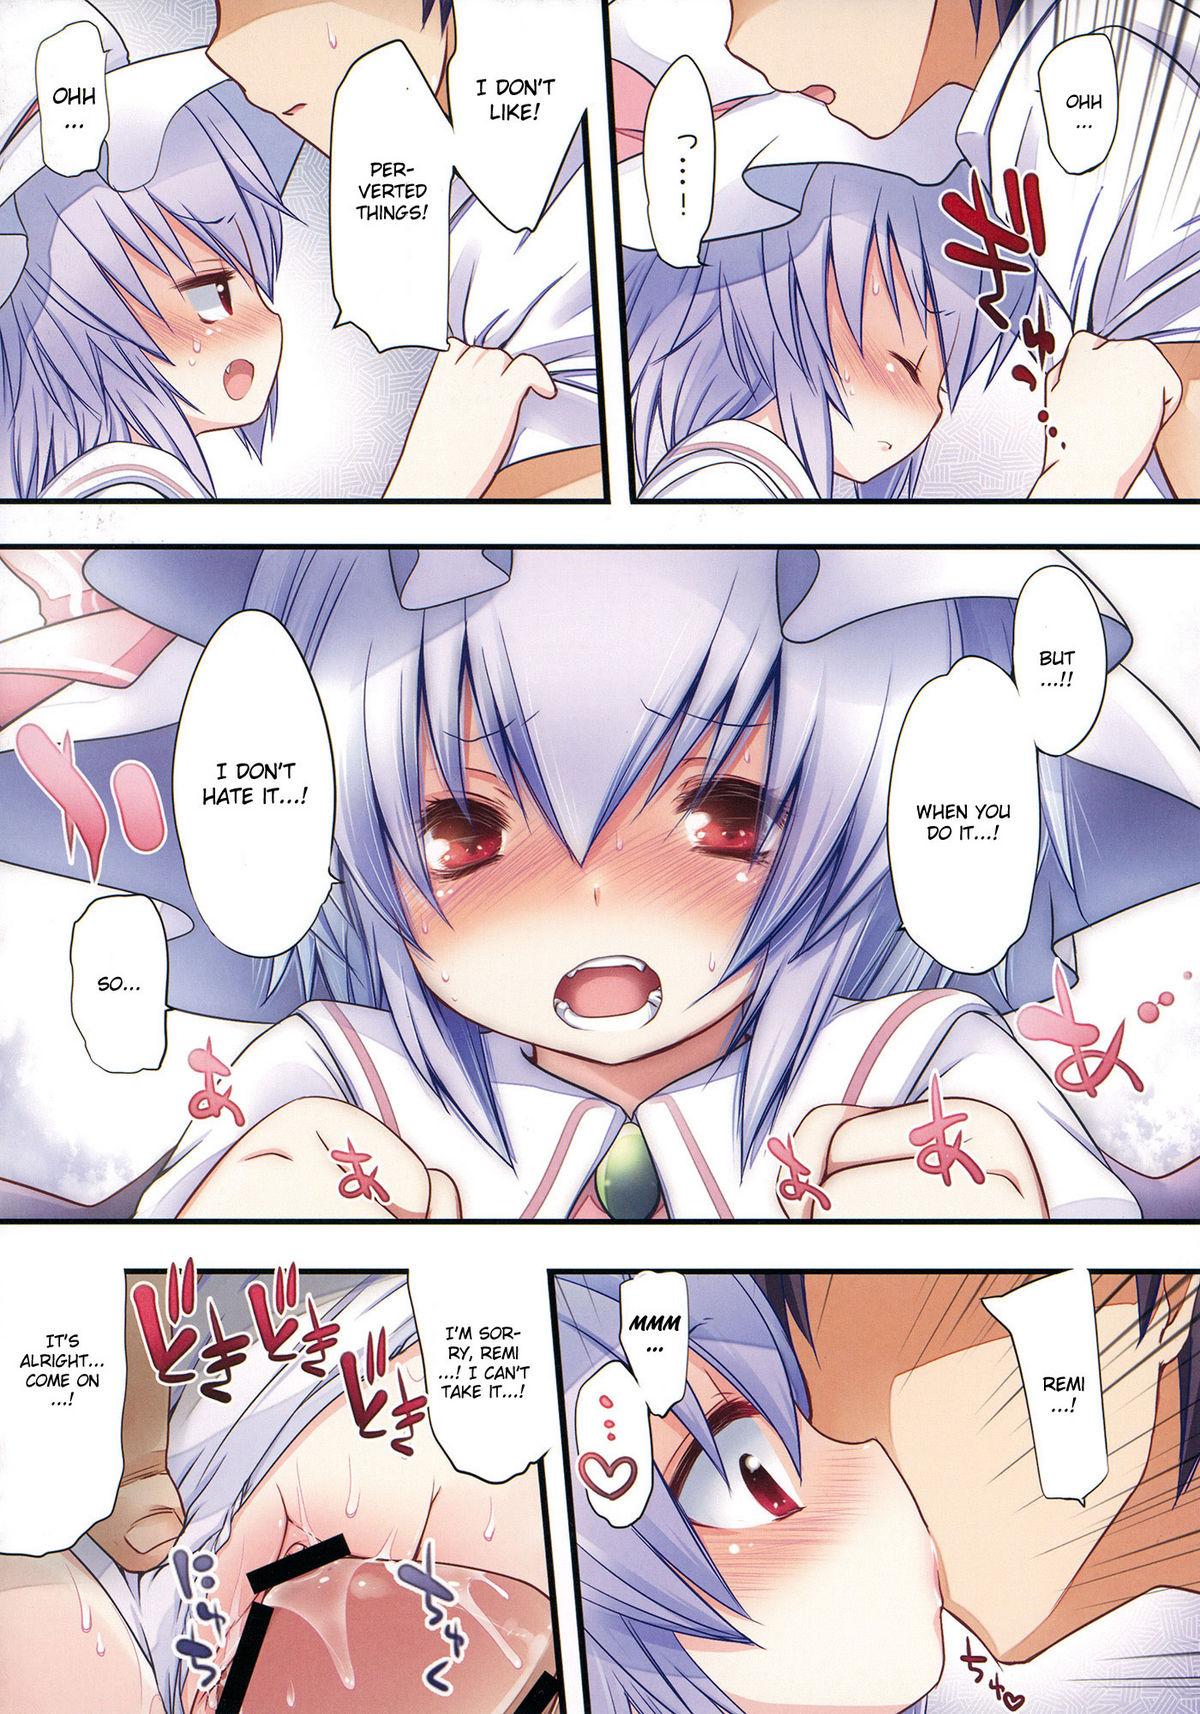 Ex Girlfriends Pedoria!! Tinkle scarlet R - Touhou project Passion - Page 11